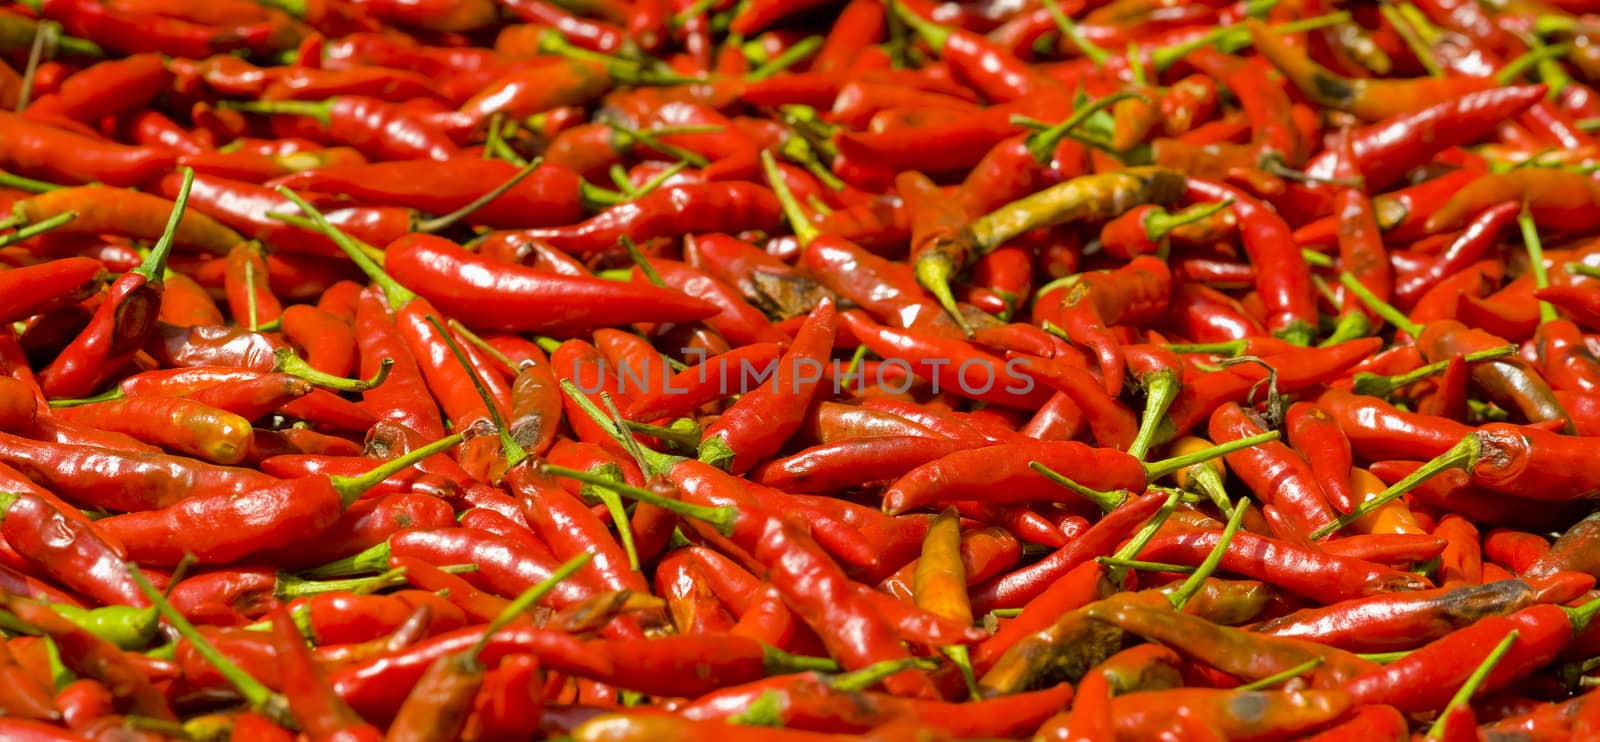 chili for sale with a shallow depth of field